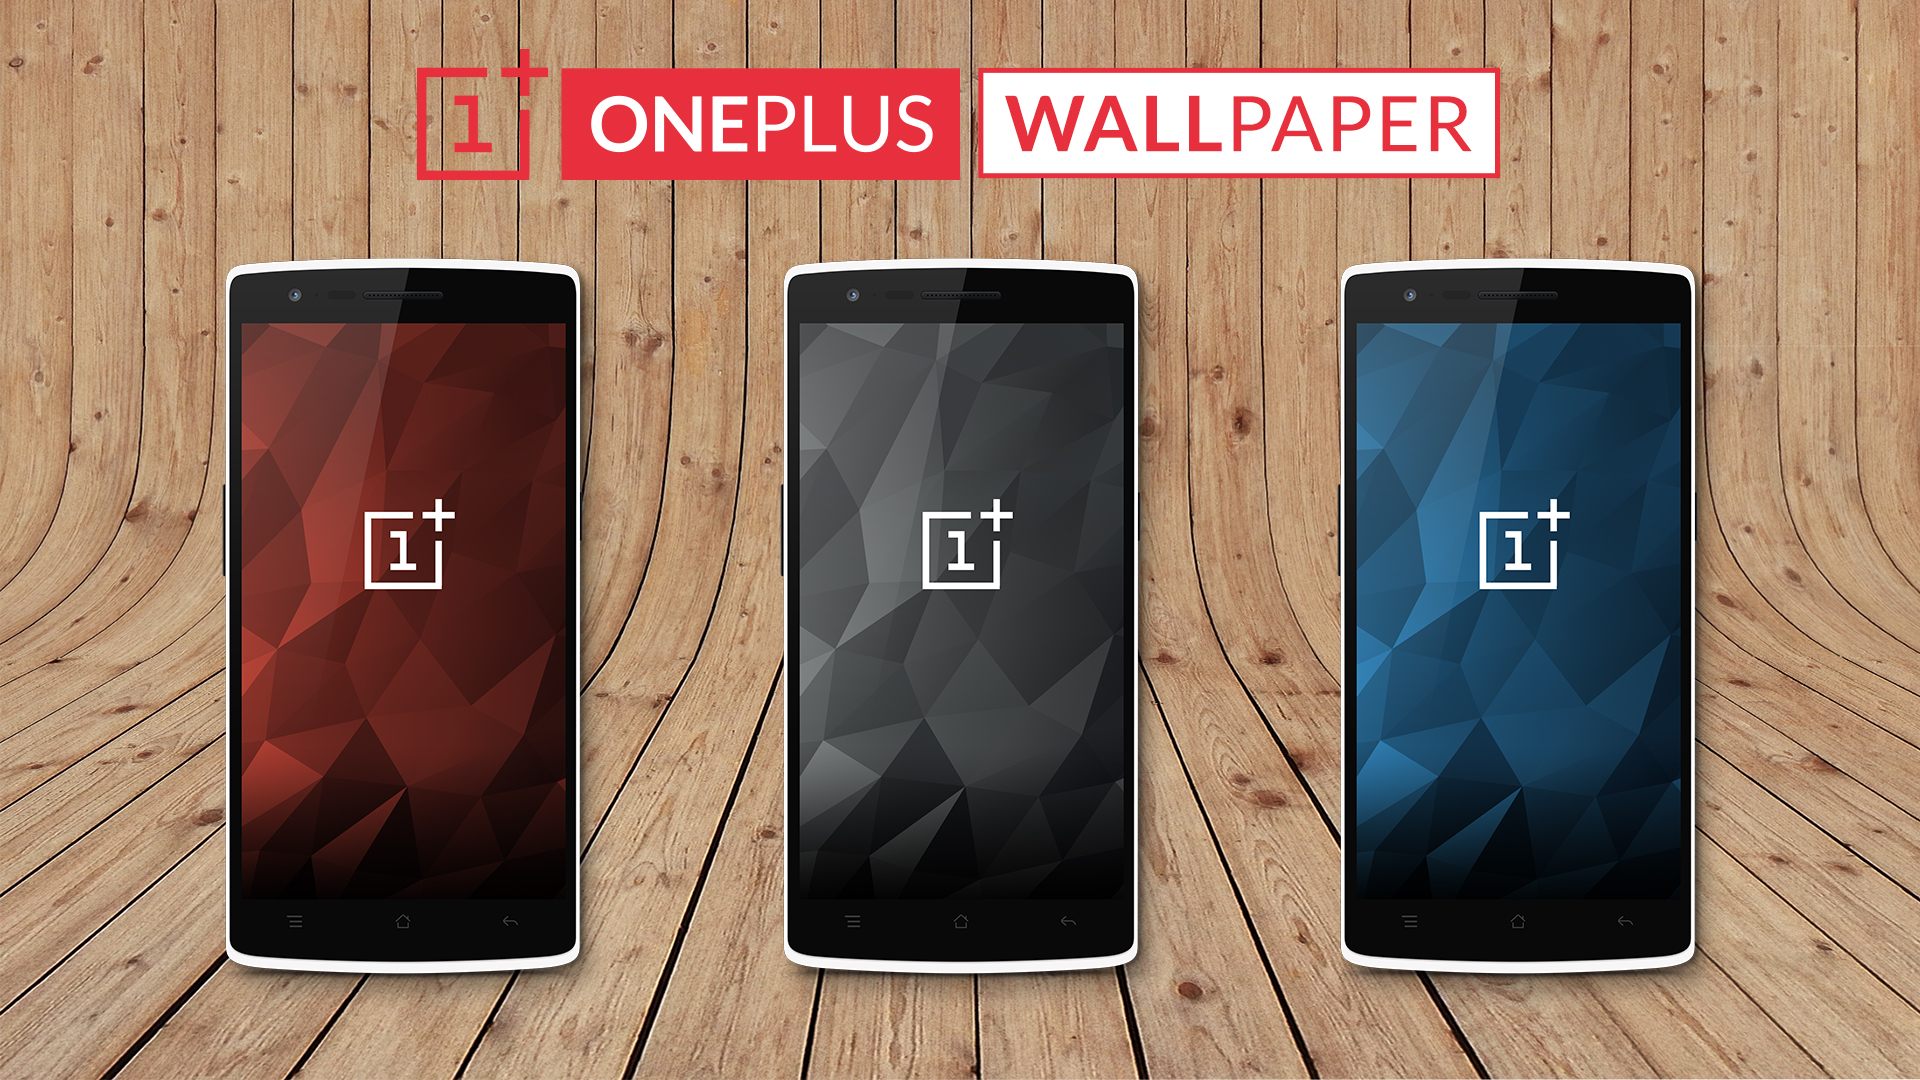 Oneplus One Wallpaper Forums